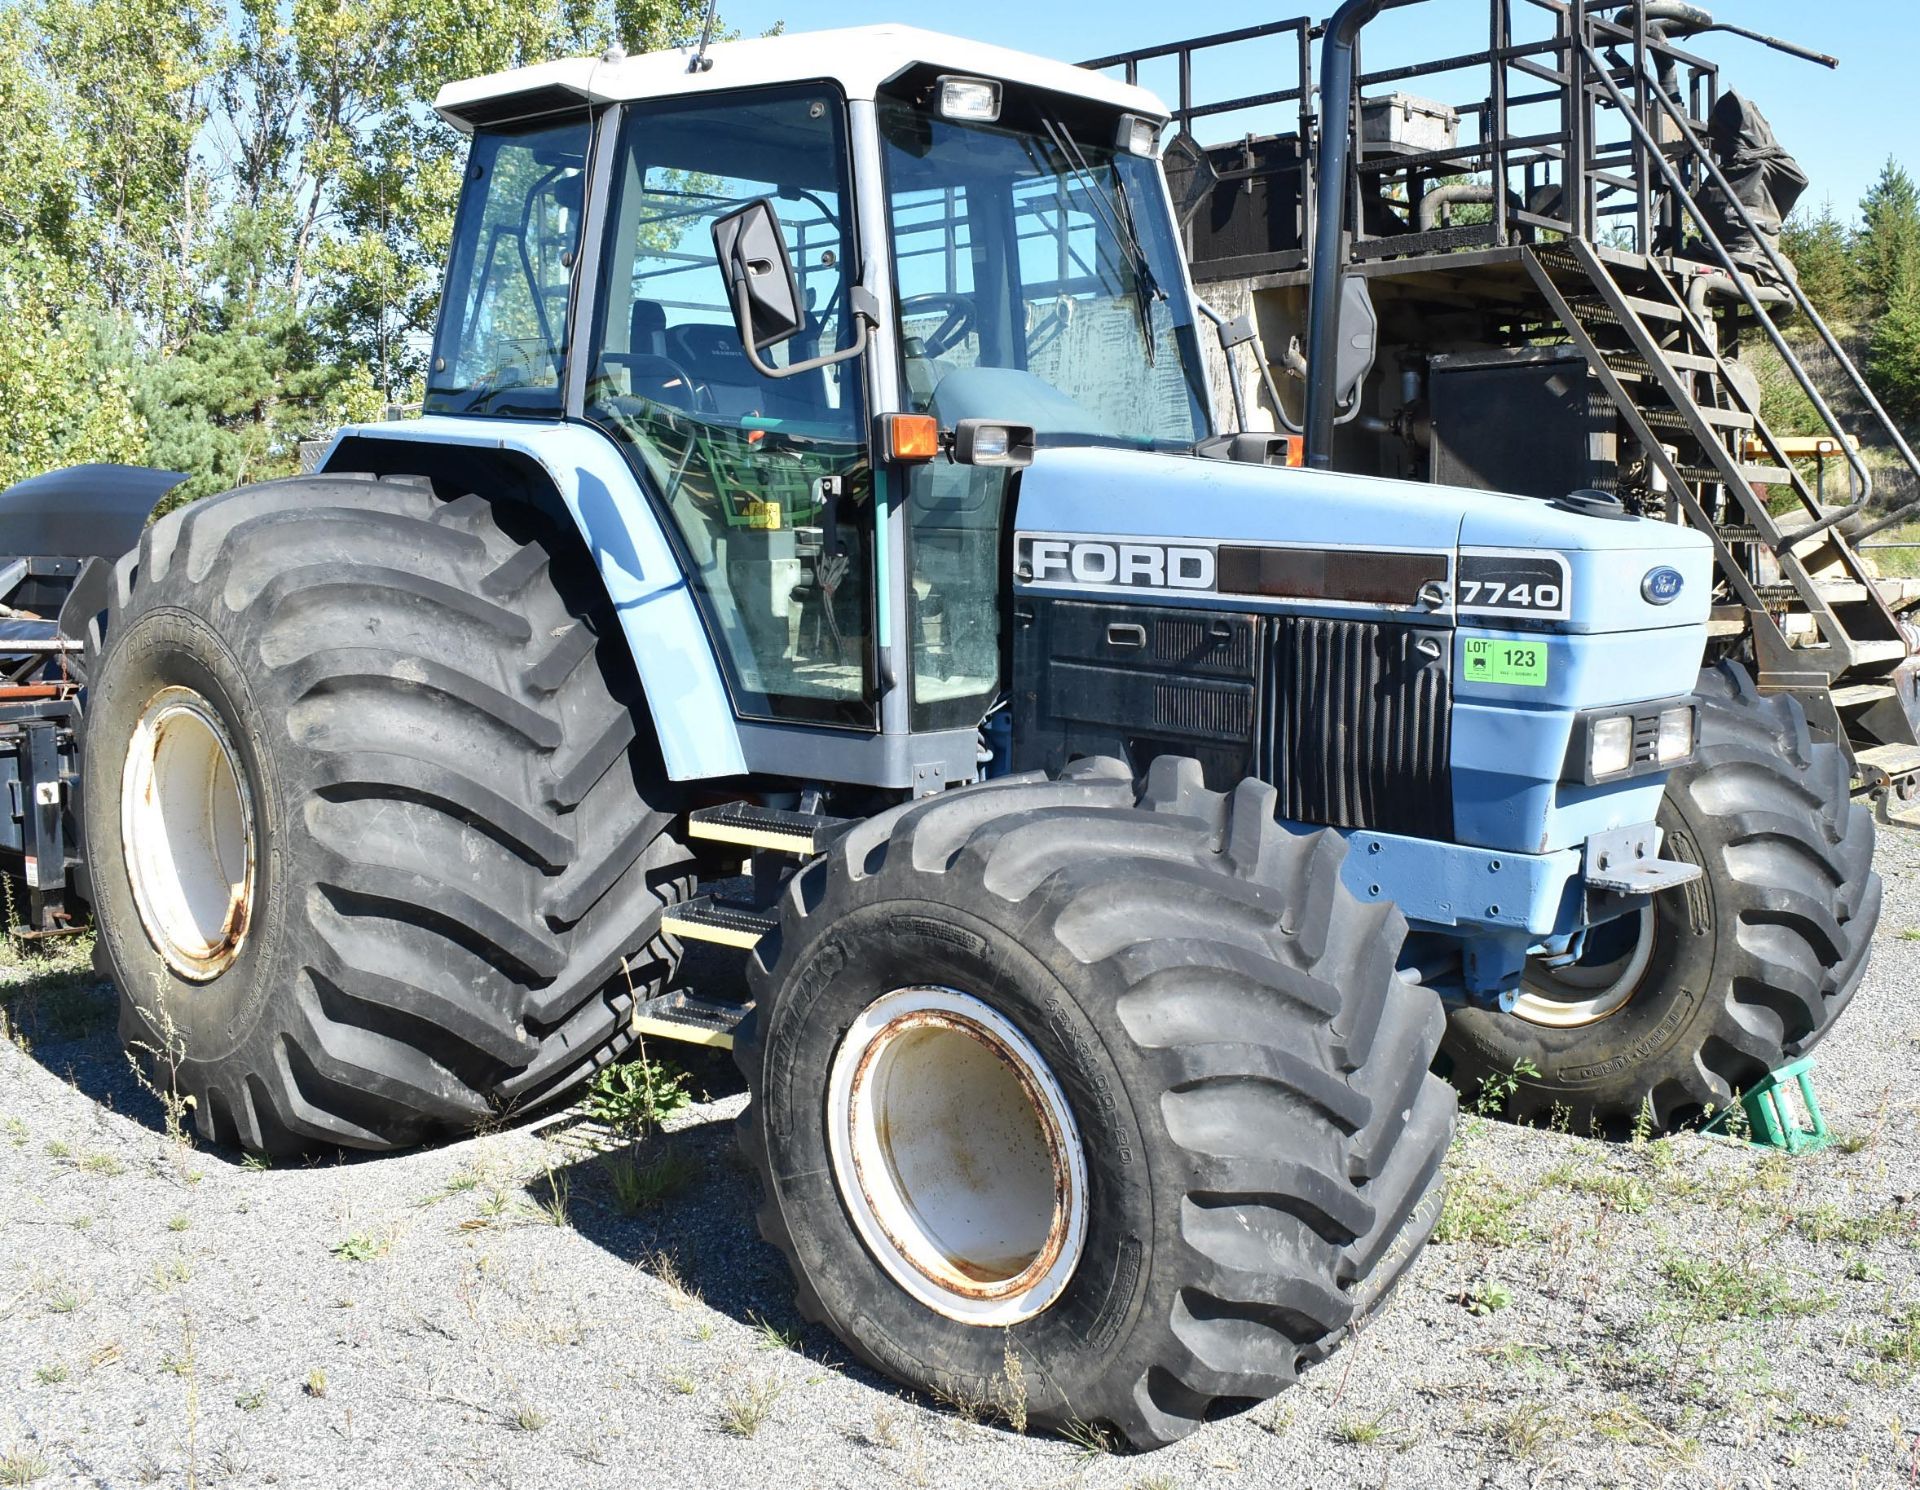 FORD 7740 ROW-CROP TRACTOR WITH FORD 5.0L 4 CYLINDER DIESEL ENGINE, CLIMATE CONTROL, AM/FM RADIO